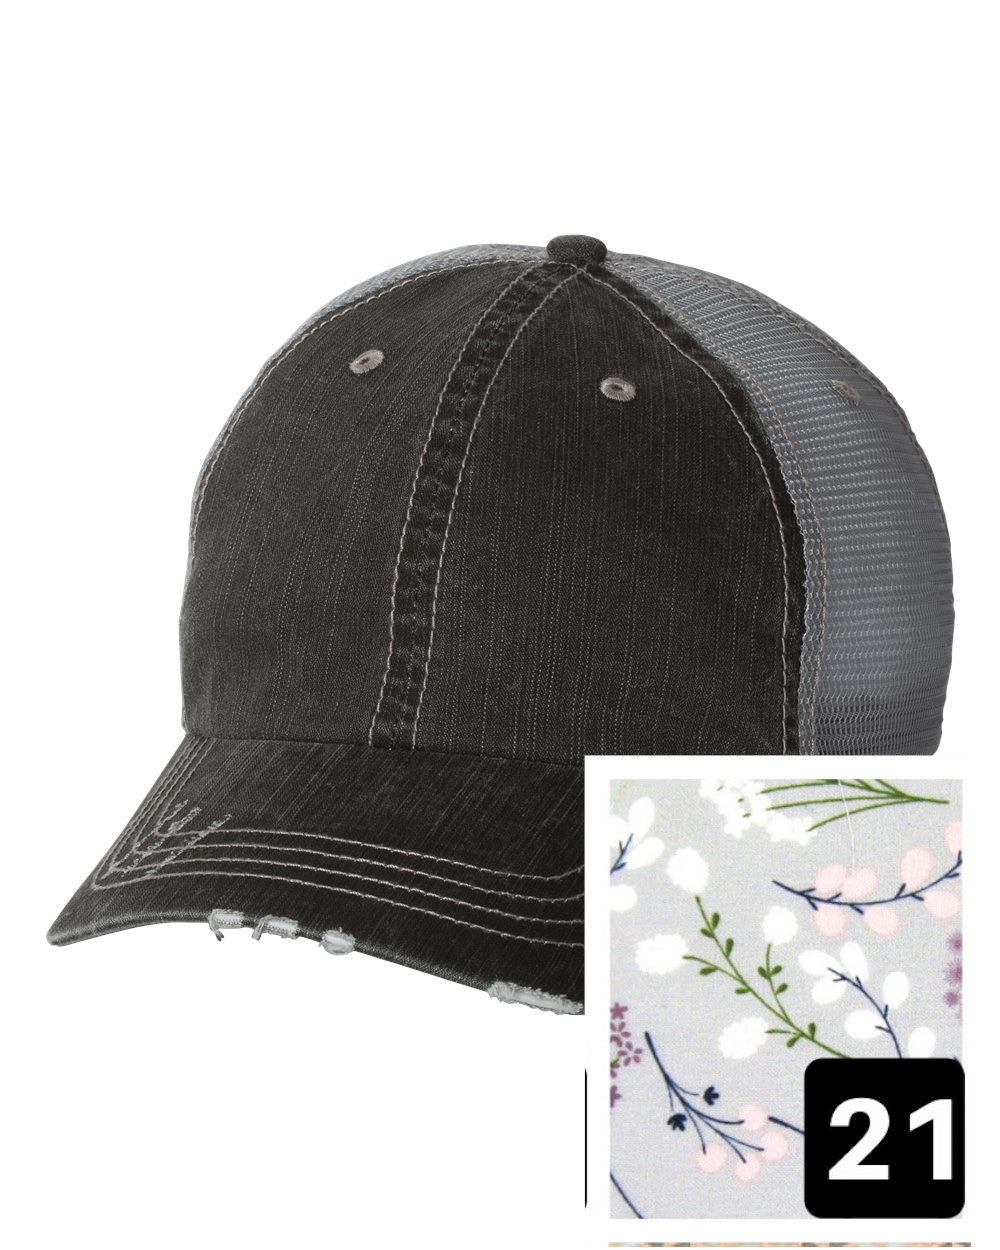 gray distressed trucker hat with yellow and white floral fabric state of Georgia